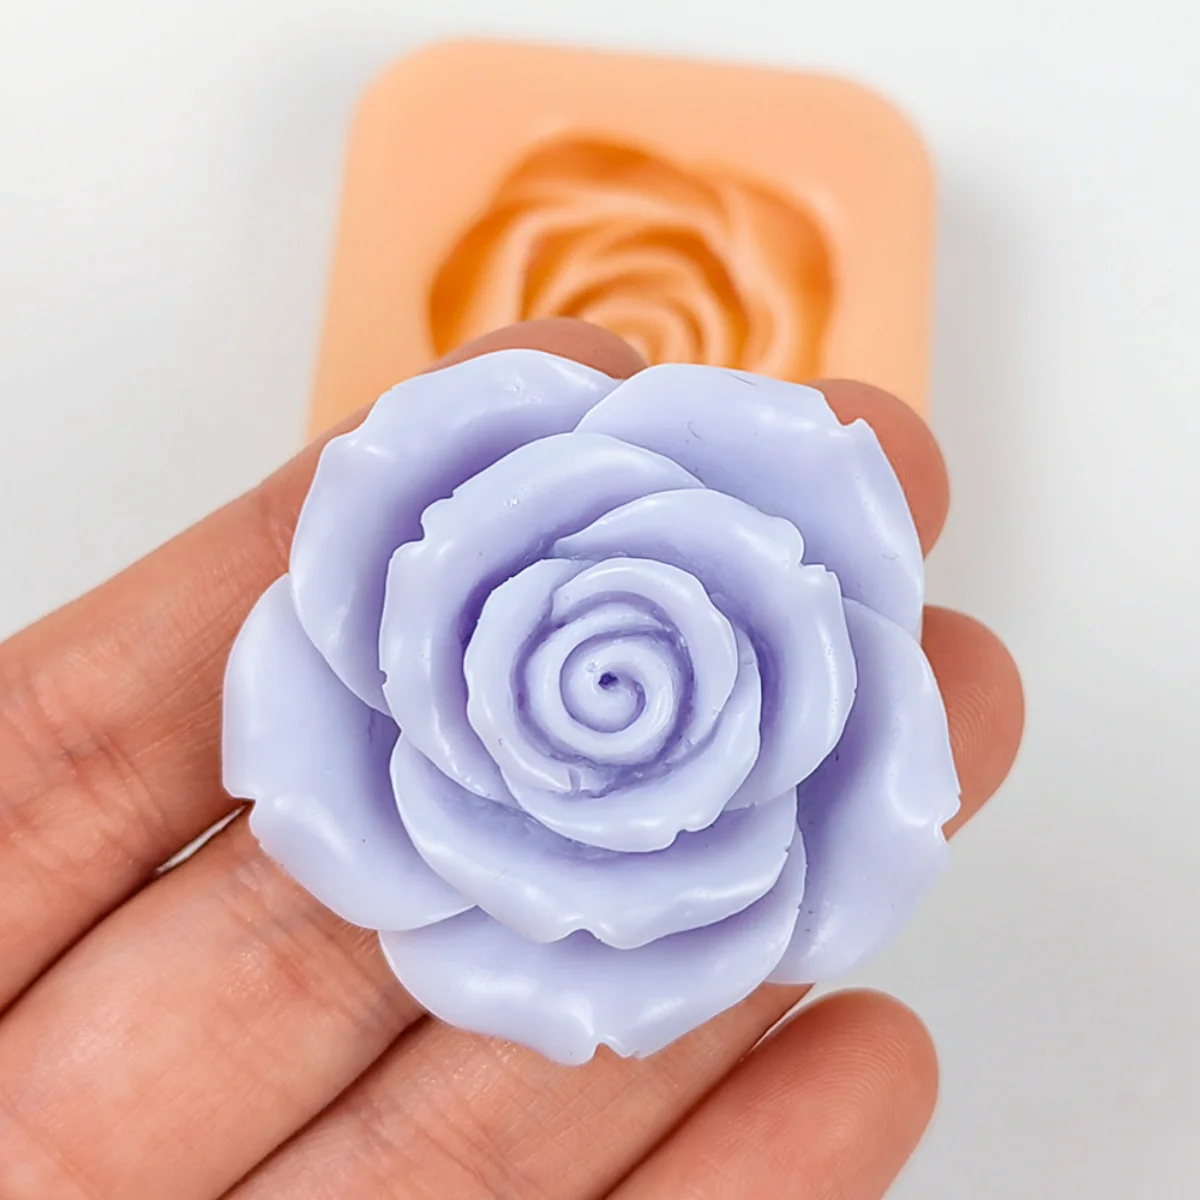 DIY Flower Soap Silicone Mold 3D Rose Candle Resin Crystal Making Kit Ice Tray Wedding Chocolate Cake Decor Valentine's Day Gift